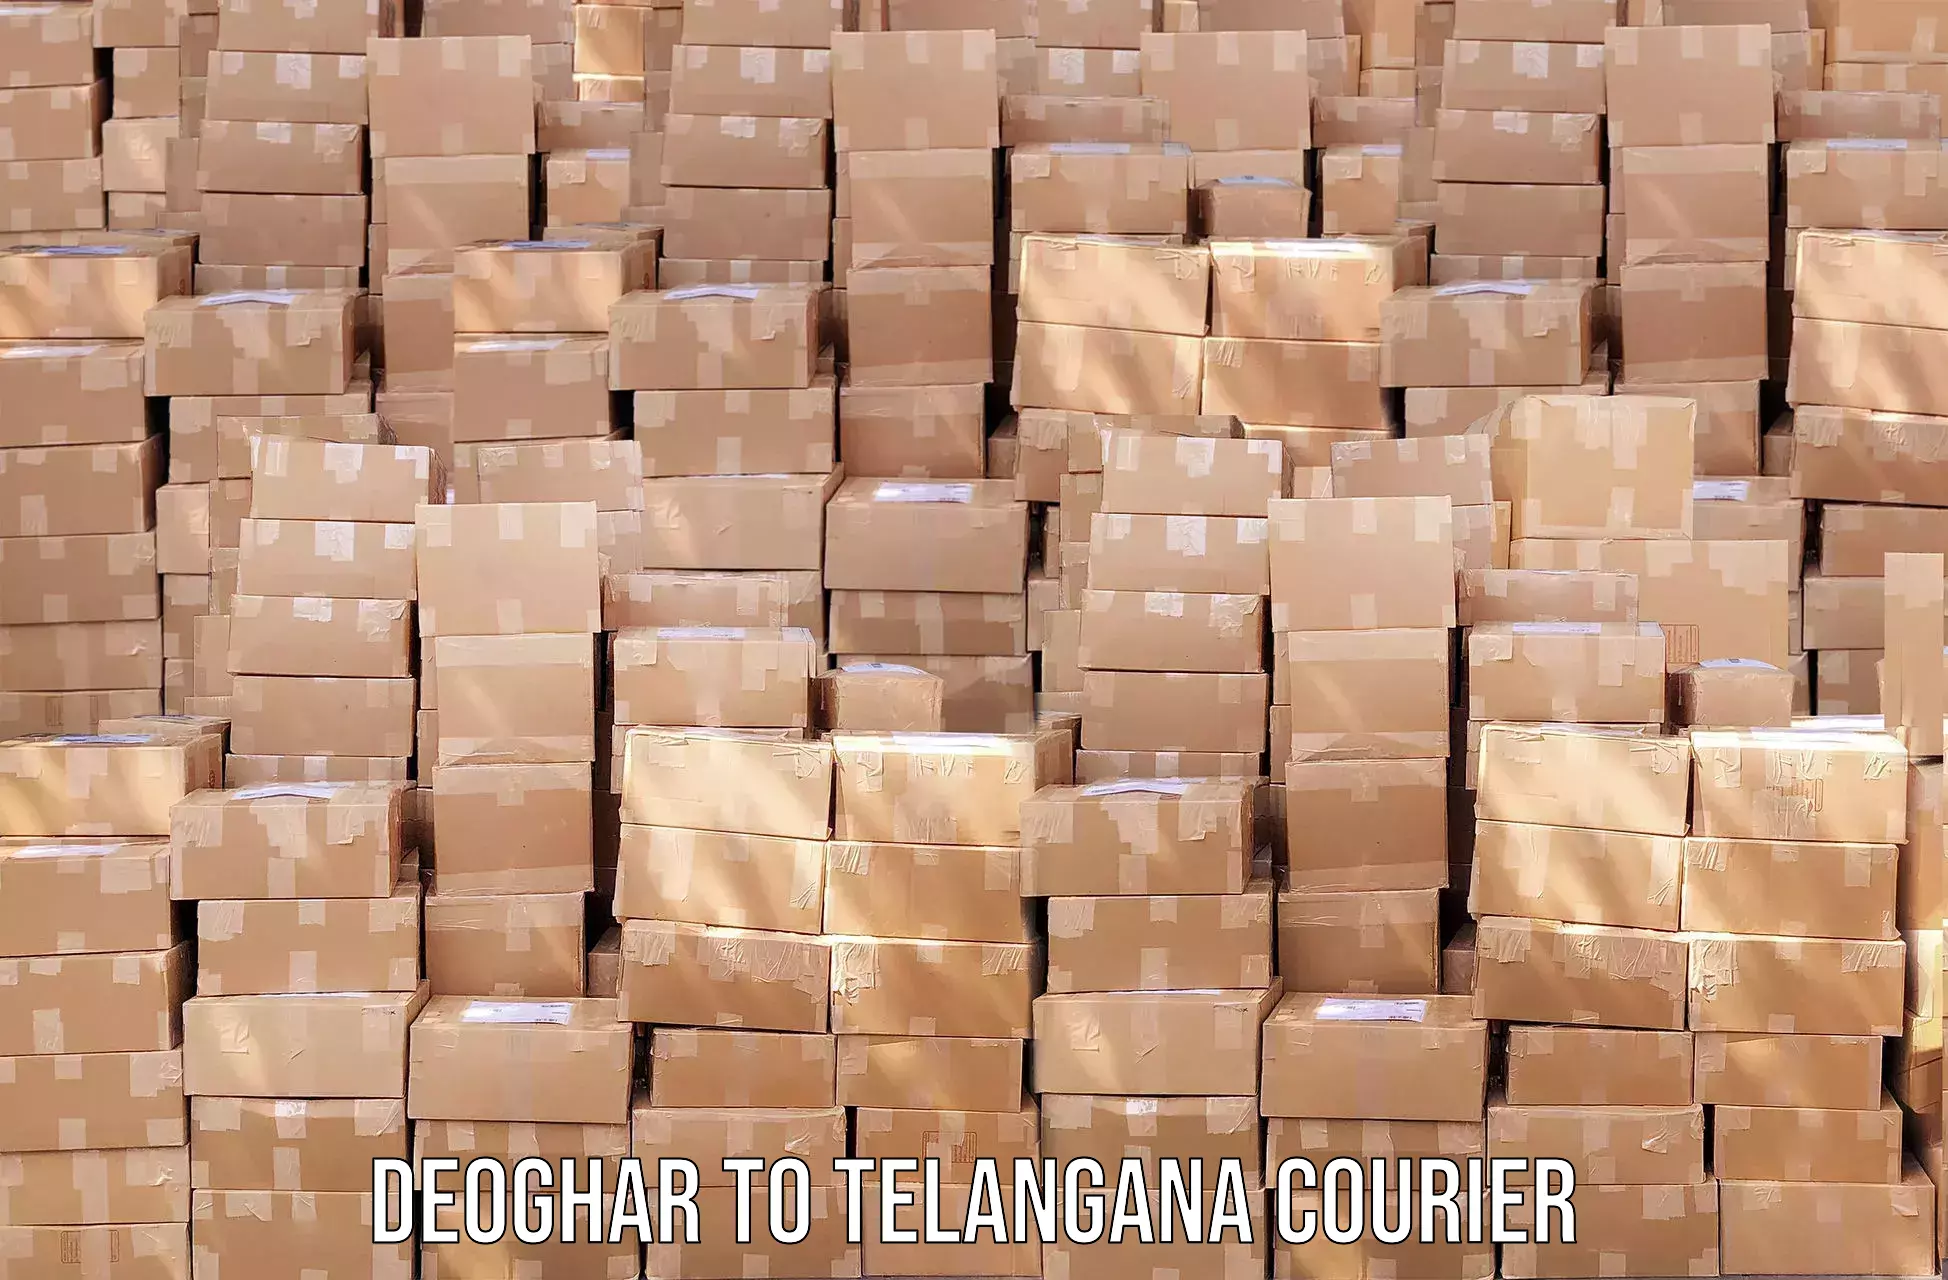 State-of-the-art courier technology Deoghar to Kaghaznagar